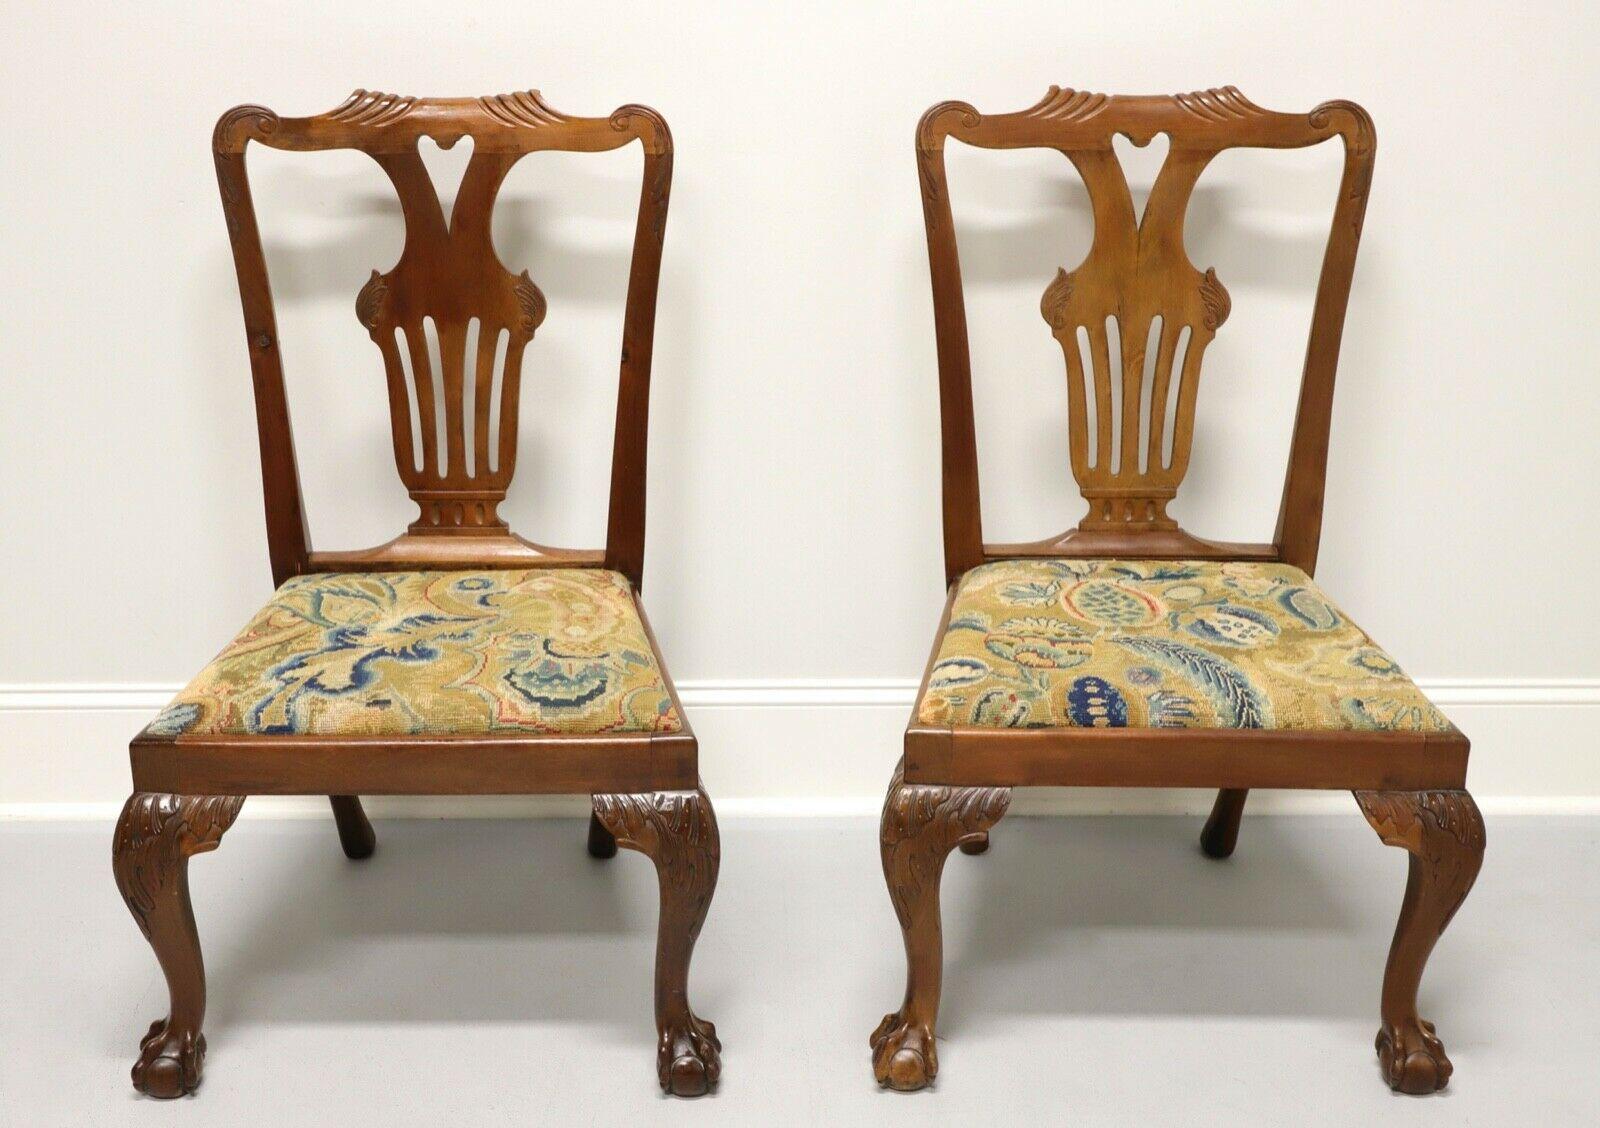 A pair of antique walnut dining side chairs in the Chippendale style, unbranded. Features carved backs, colorful needlepoint seats, cabriole legs with carved knees and ball in claw feet. Likely made in the USA, in the late 19th Century.

Measures: